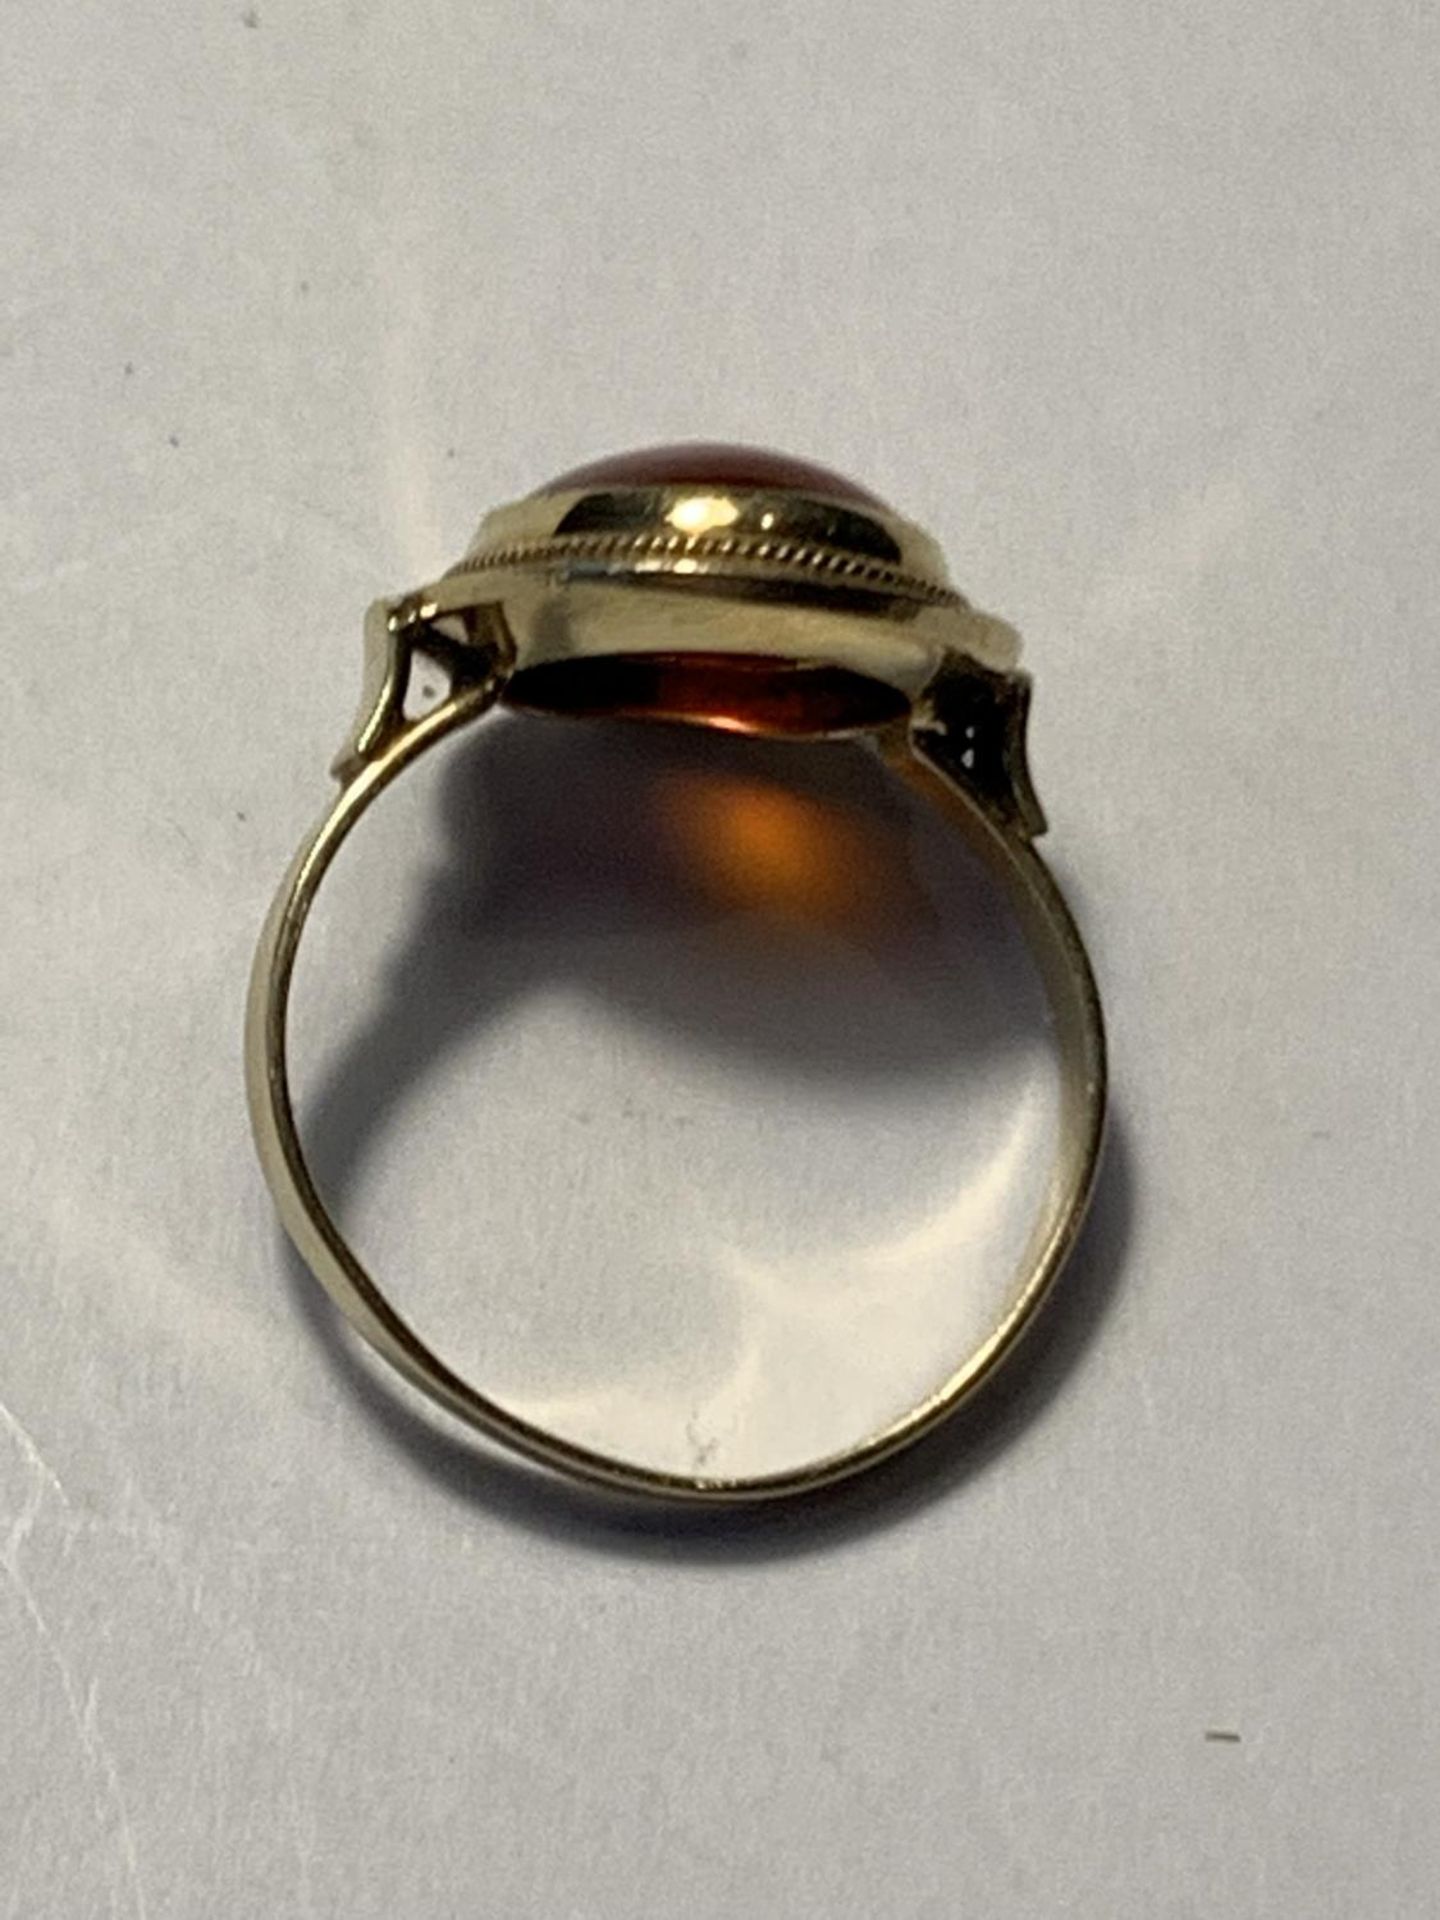 A 14 CARAT GOLD RING WITH AMBER STONE SIZE N GROSS WEIGHT 2.71 GRAMS - Image 3 of 3